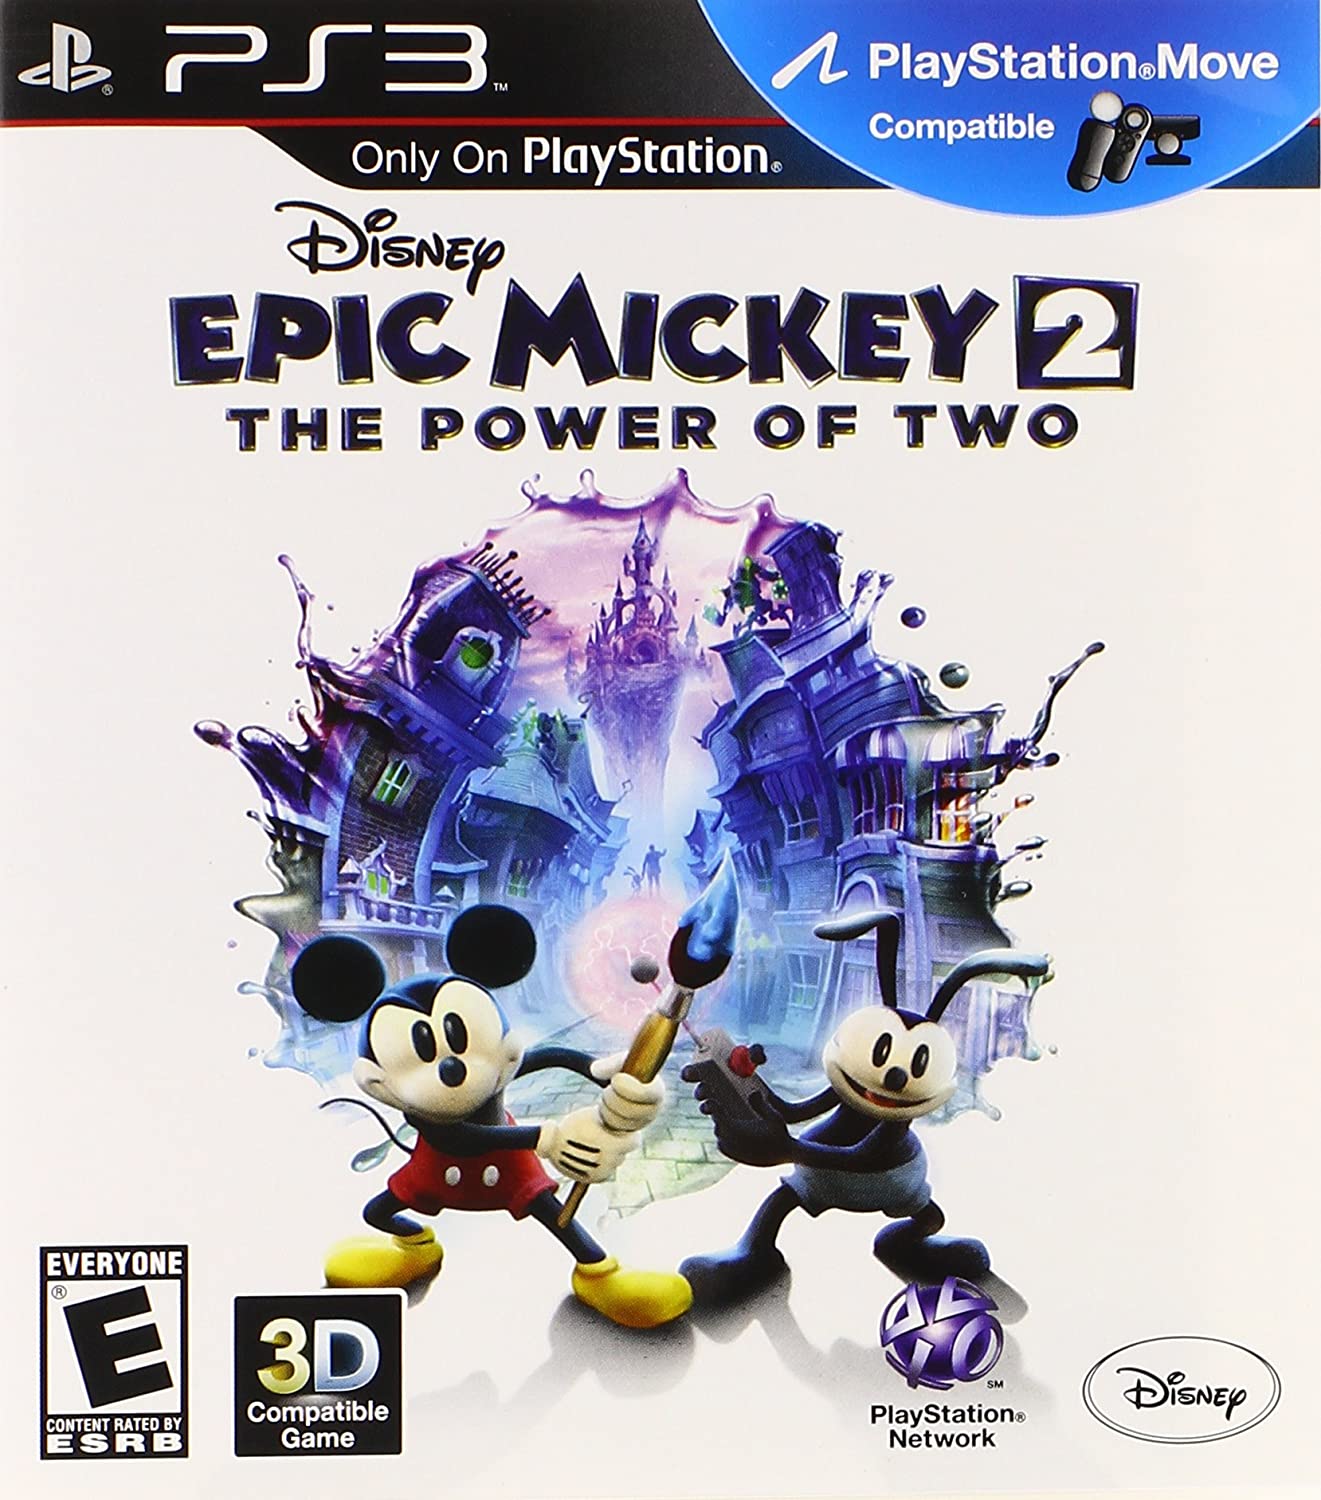 Disney Epic Mickey 2 The Power of Two PS3